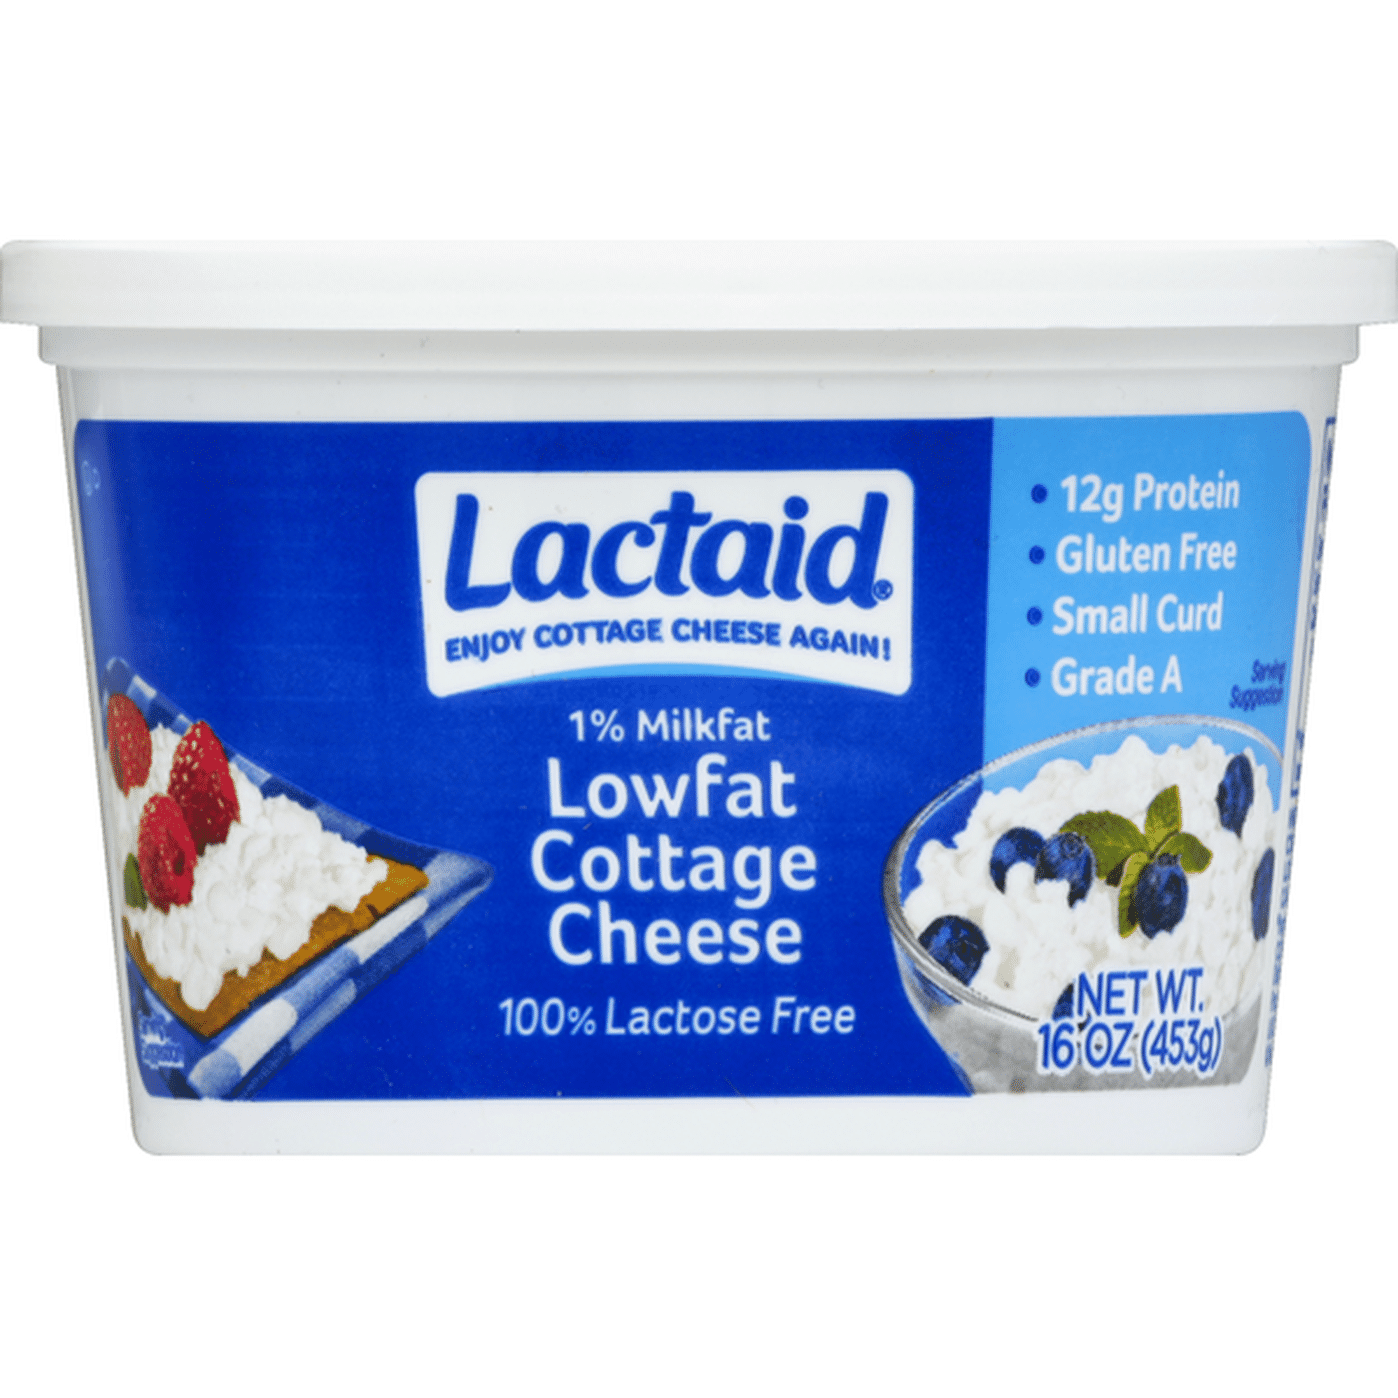 Lactaid Cottage Cheese, Small Curd, 1 Milkfat, Lactose Free, Lowfat